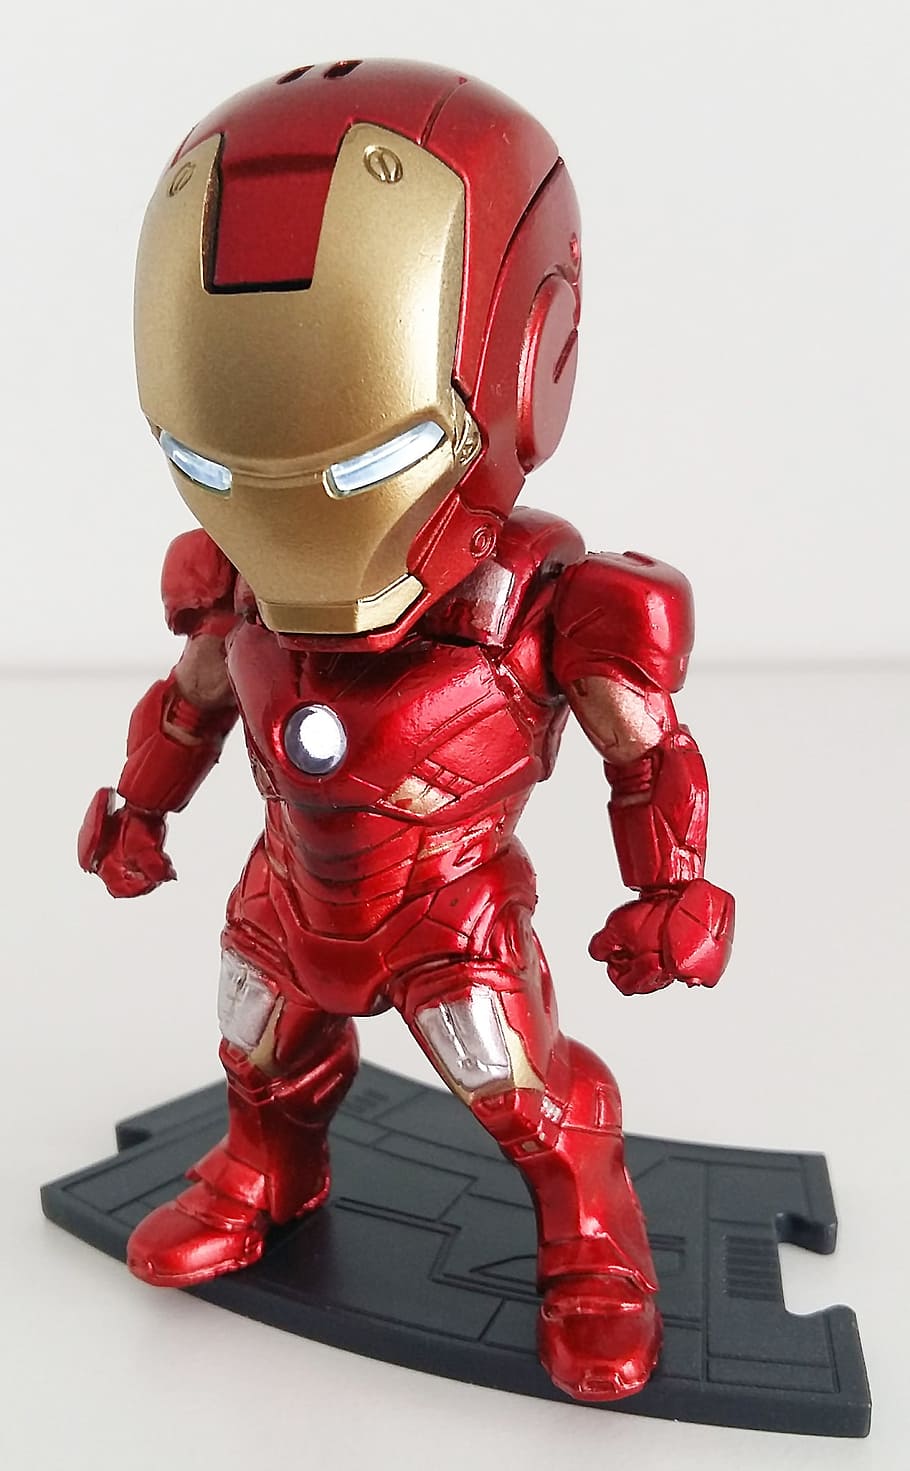 action figure, figure, collect, figures, toys, collectibles, iron man, marvel, red, indoors